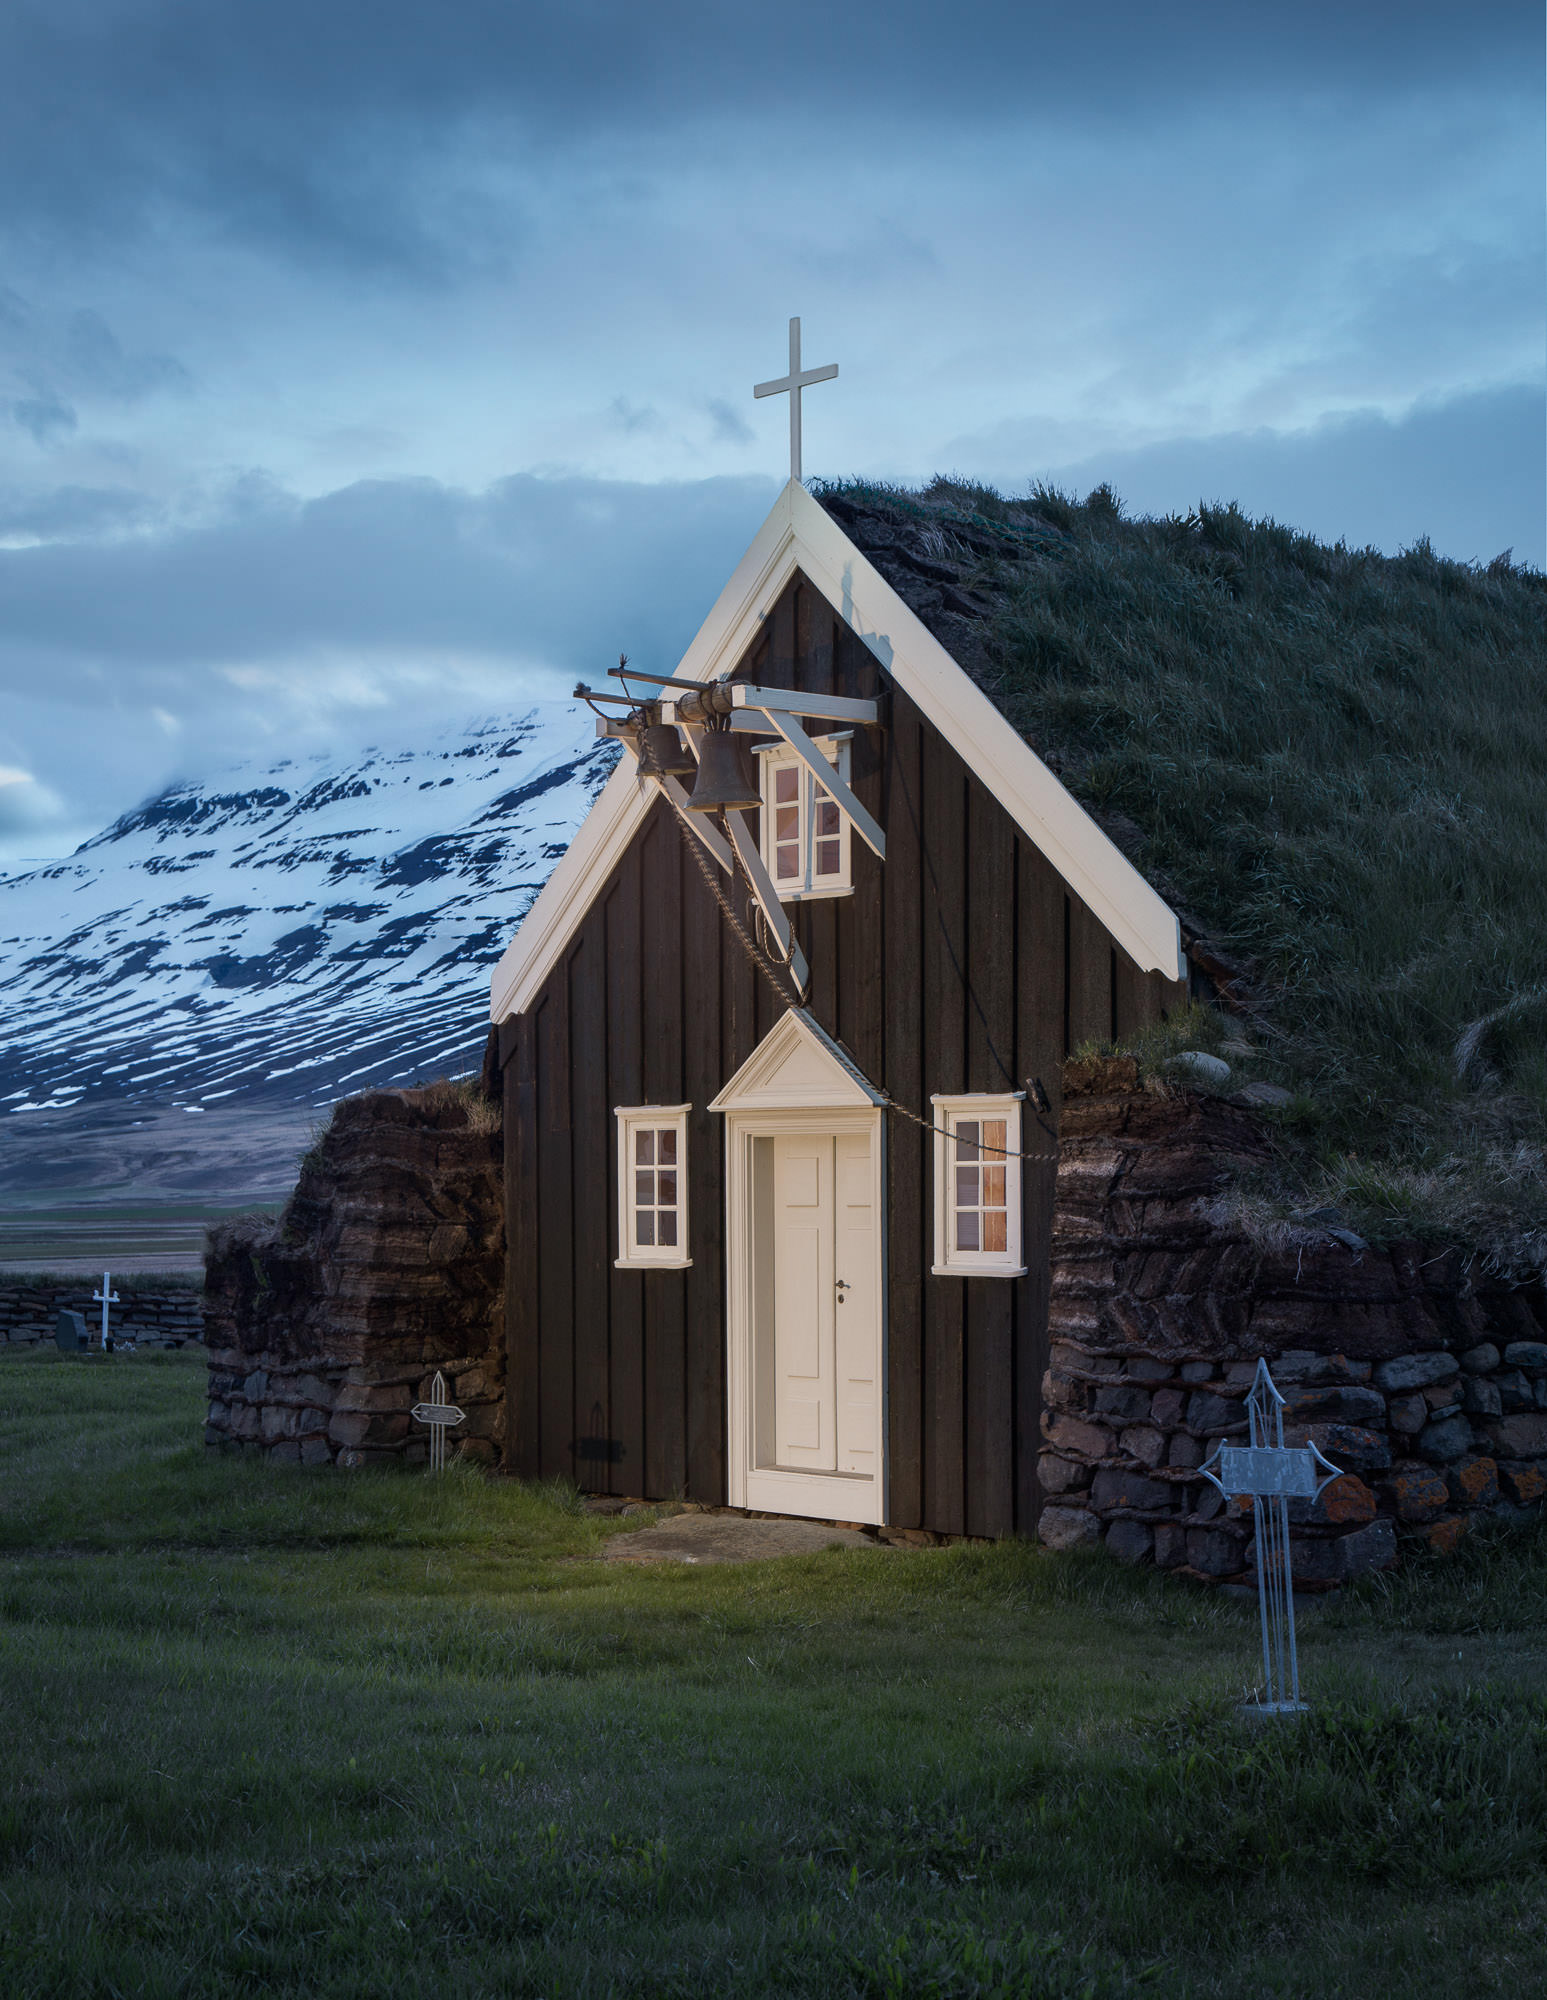 mike-kelley-iceland-architecture-7.jpg